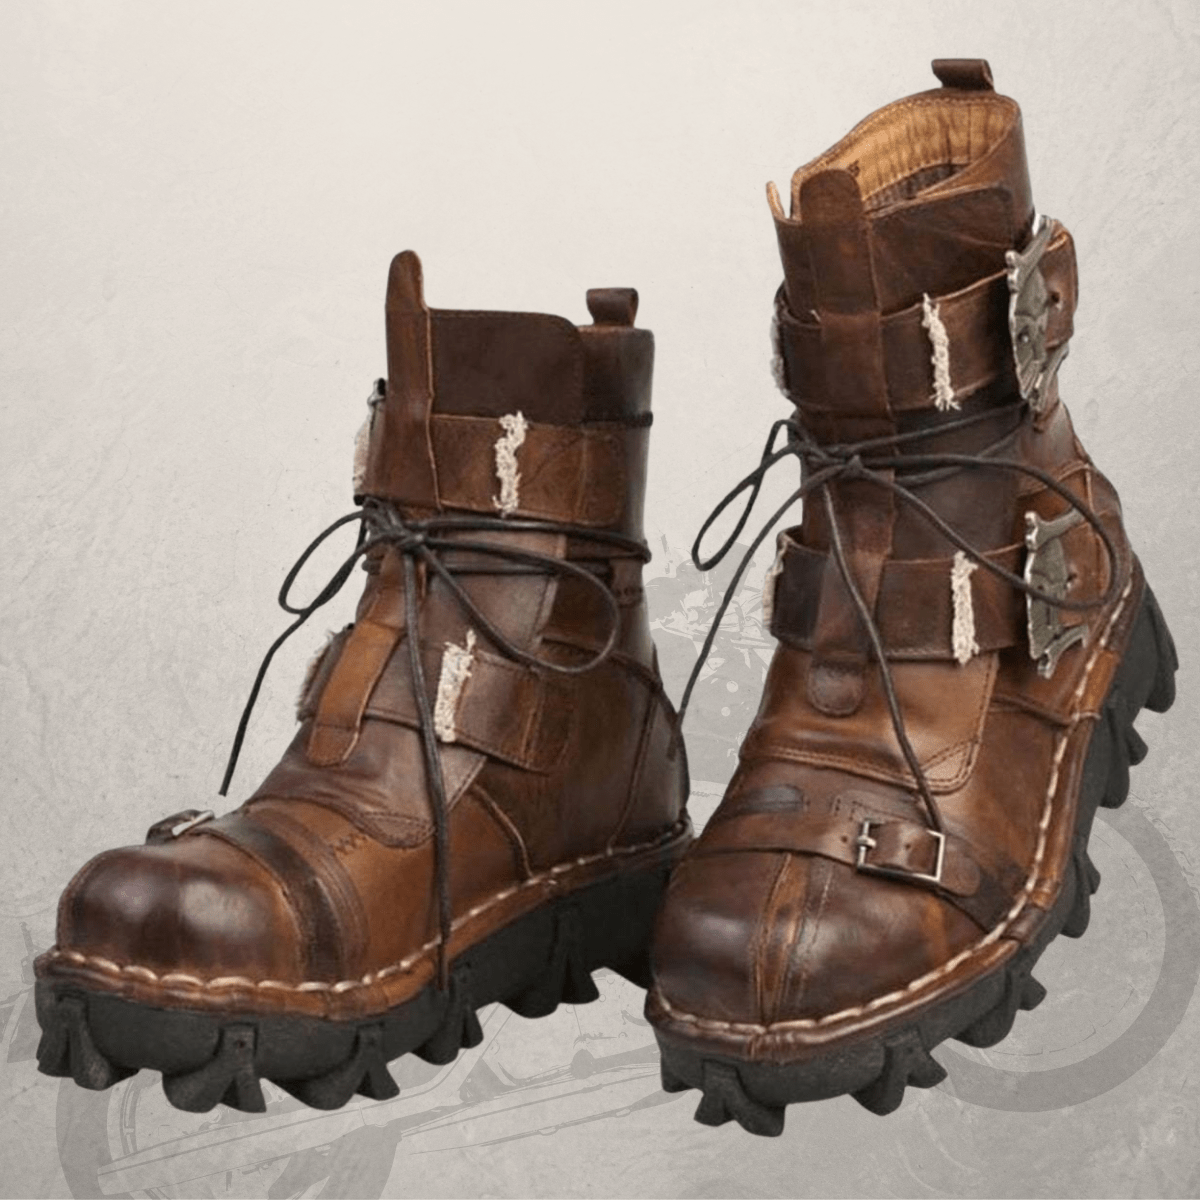 Description: Handmade brown leather biker boots with buckles and straps.
Product Name: Handmade Skull Leather Boots + Free Leg Bag Bundle